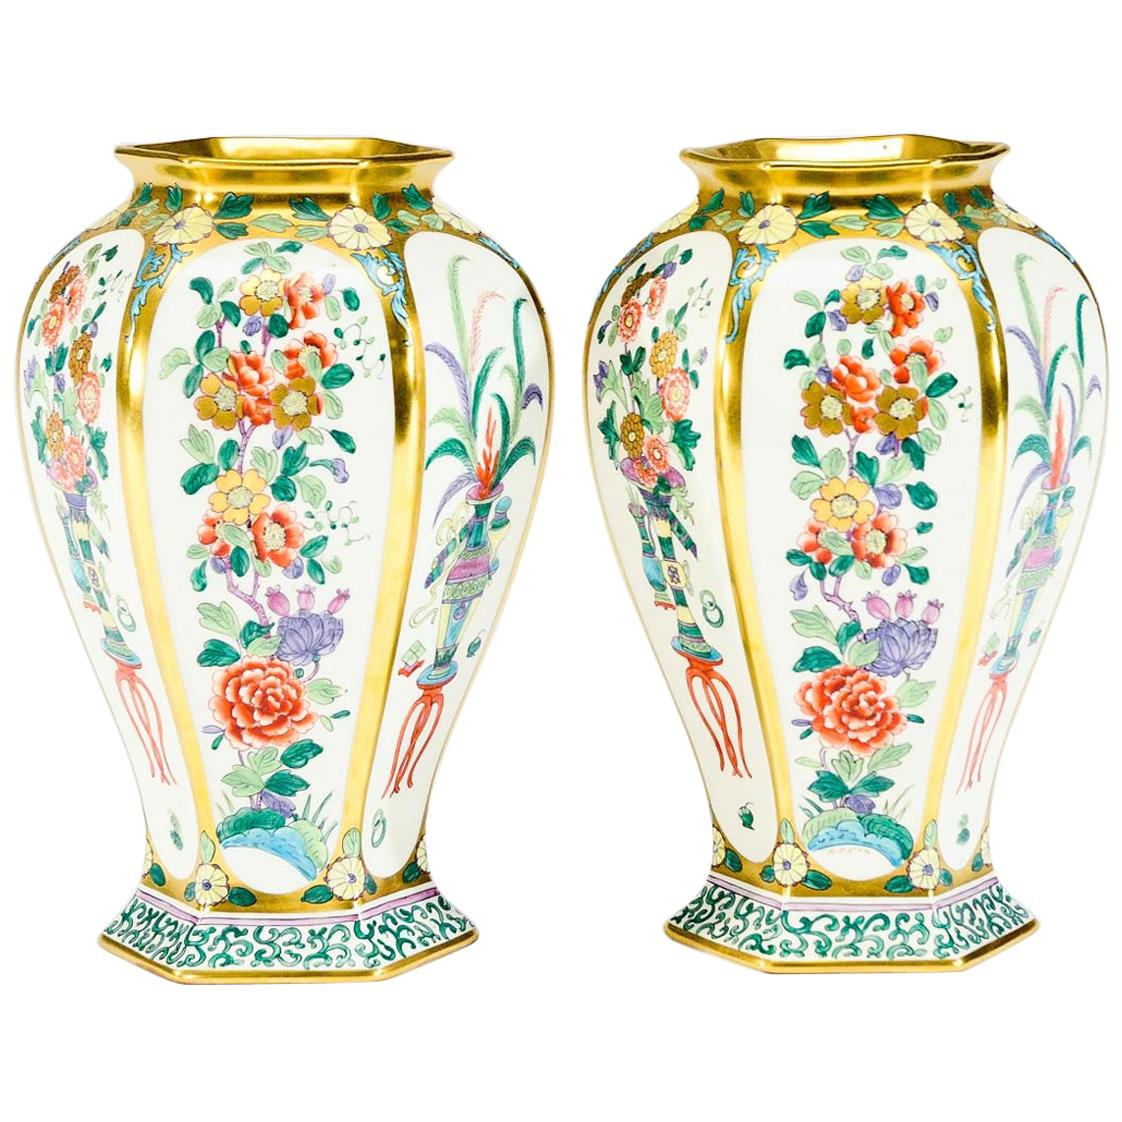 Pair of Pickard Hand Painted Artist Signed Japonesque Vases, circa1912